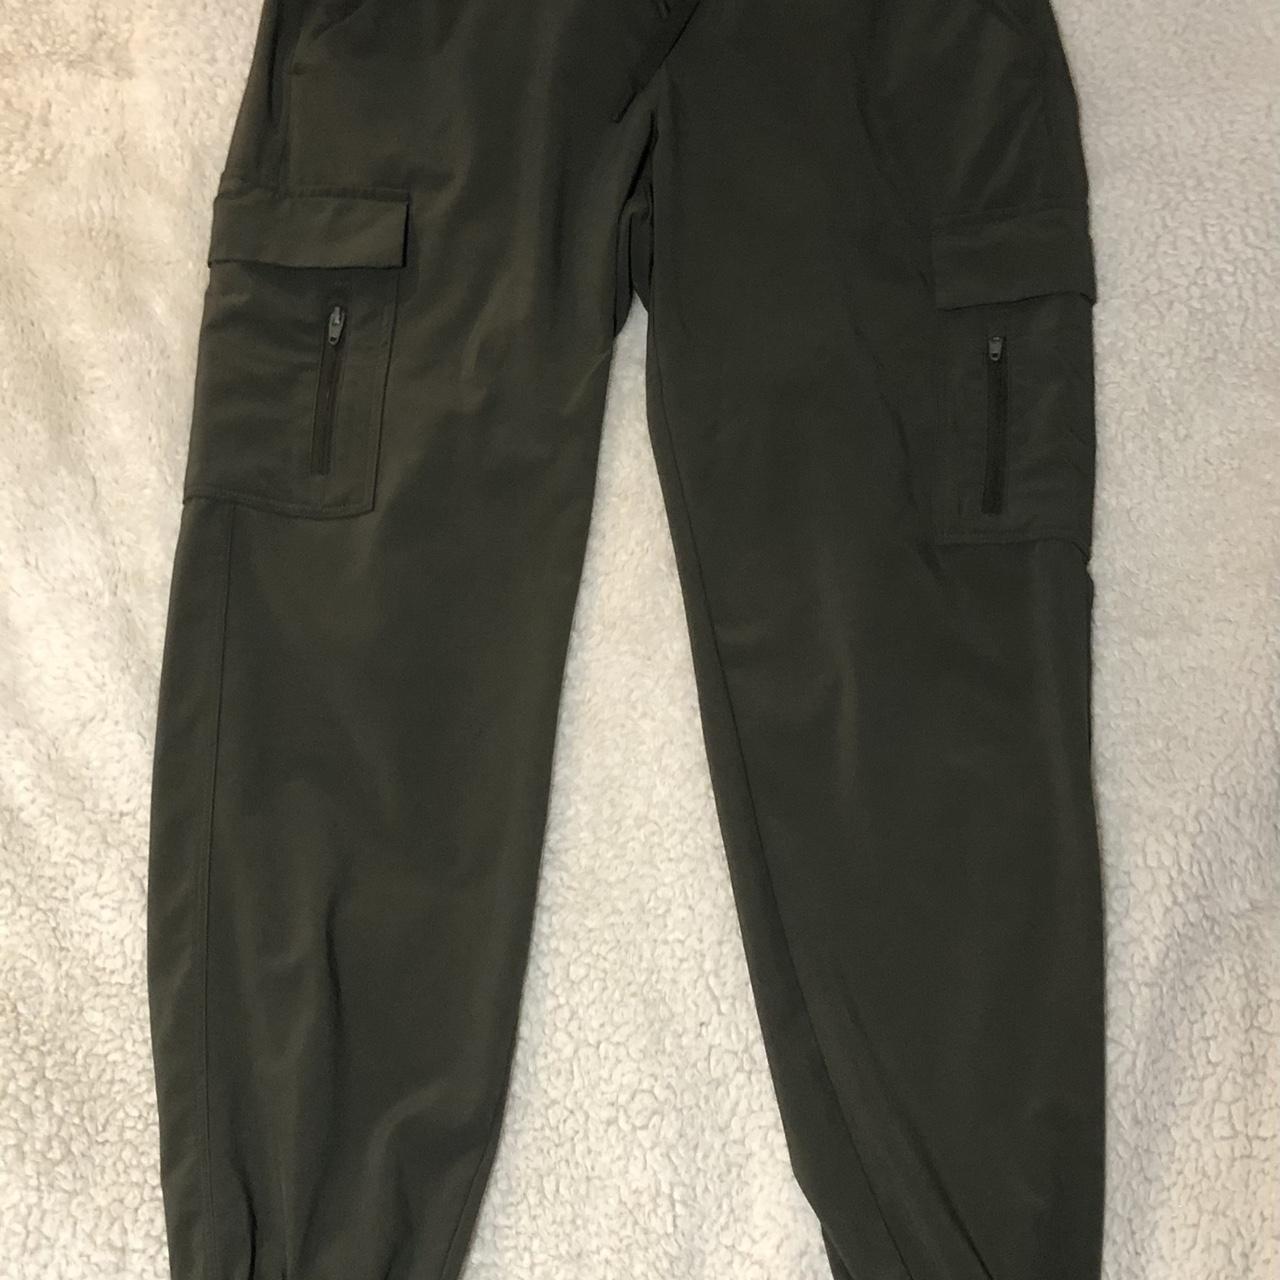 all in motion from Target jogger pants in color - Depop